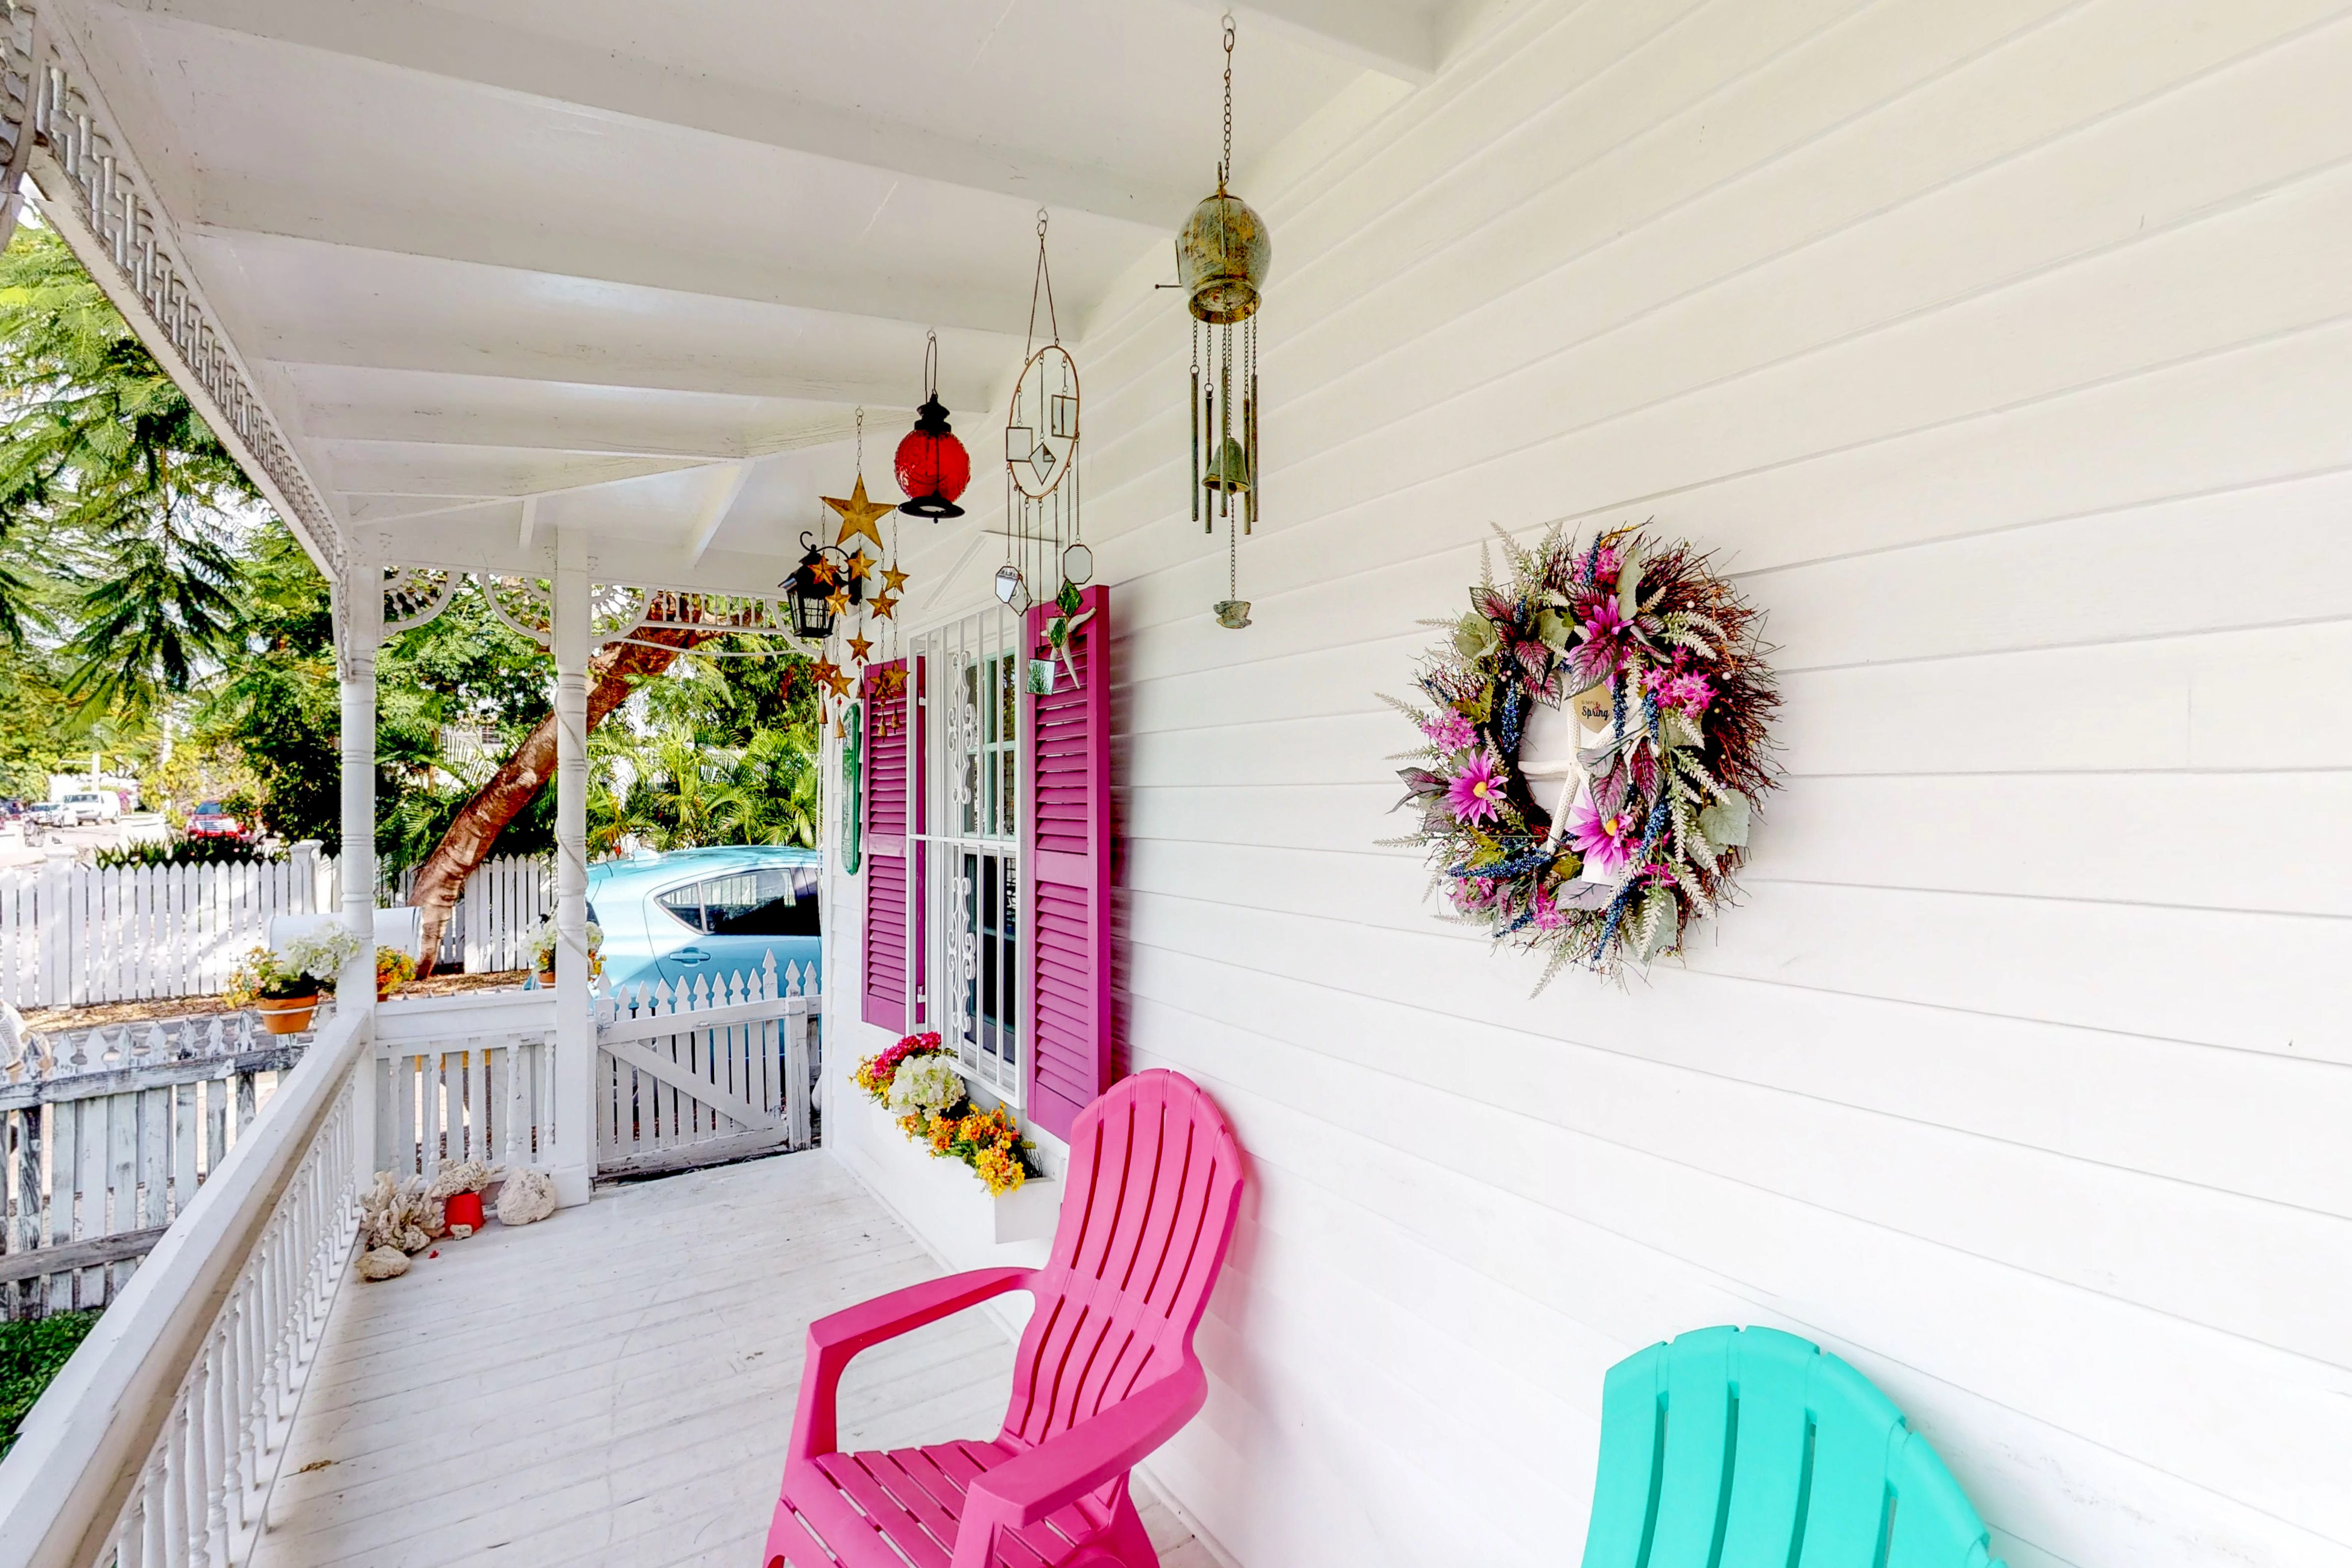 Gingerbread House / Cottage rental in Beach House Rentals Key West in Key West Florida - #3